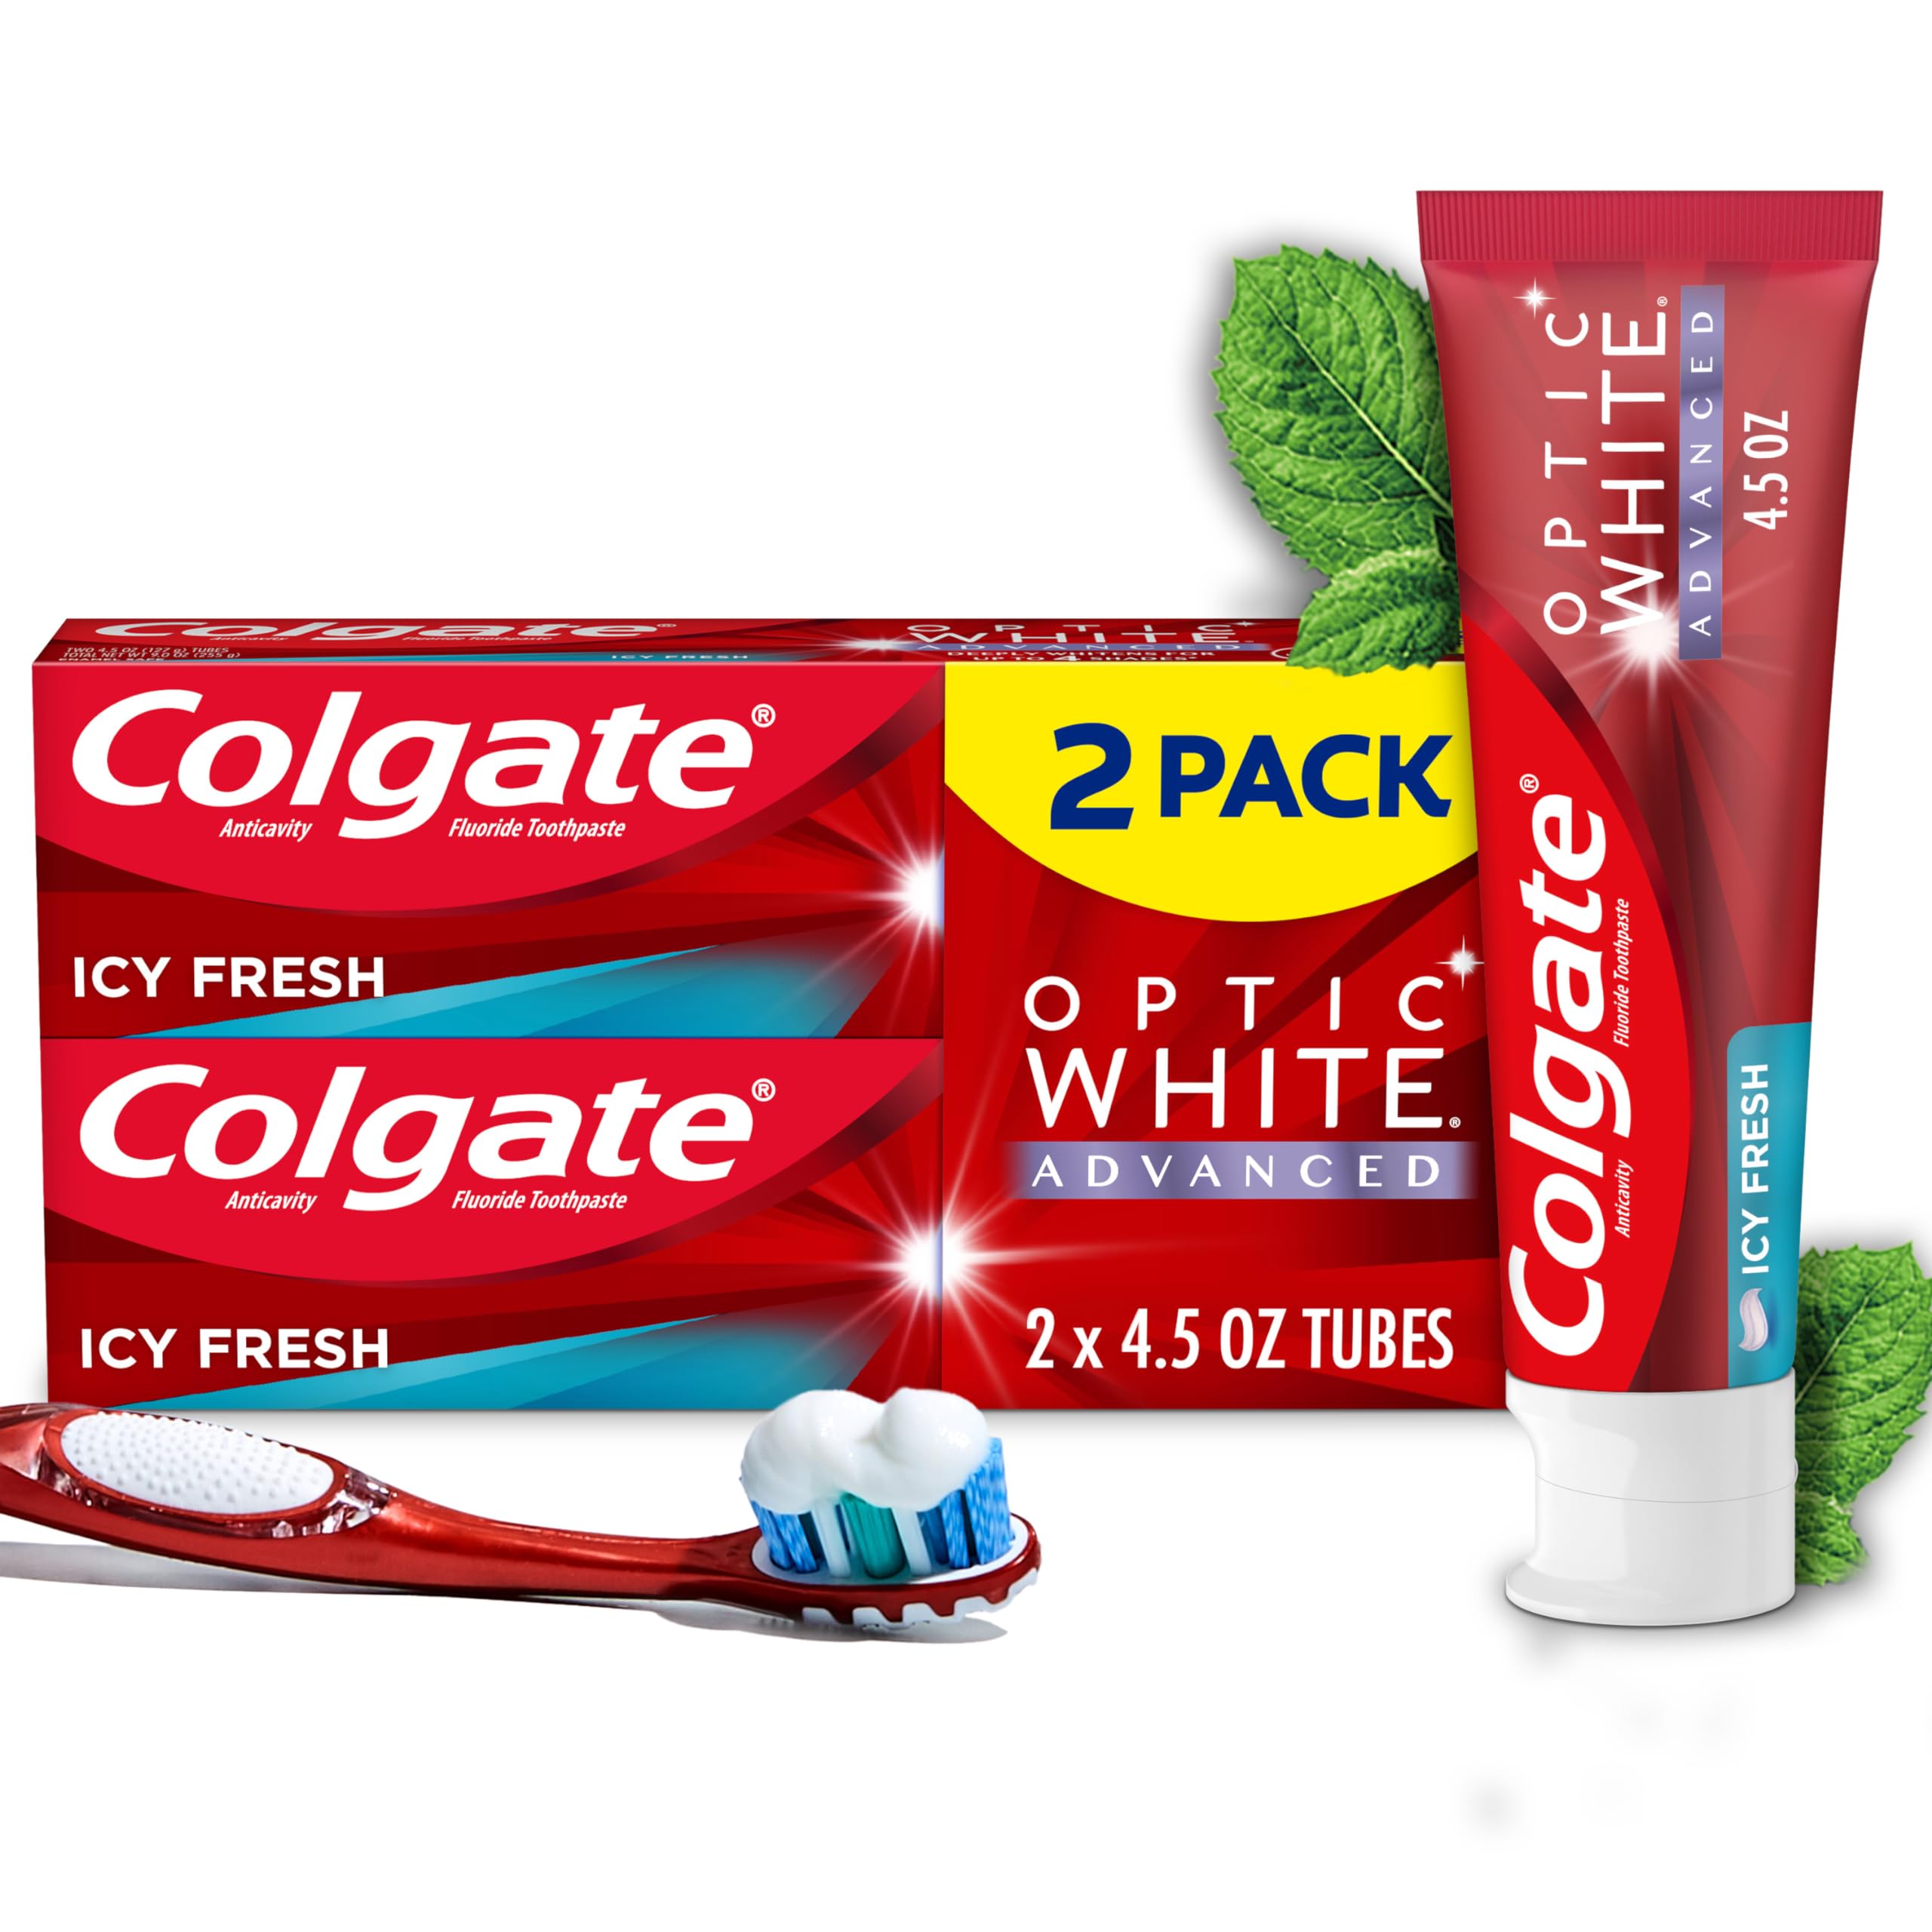 2-Pack Colgate Optic White Advanced Teeth Whitening Toothpaste as Low as $5.06